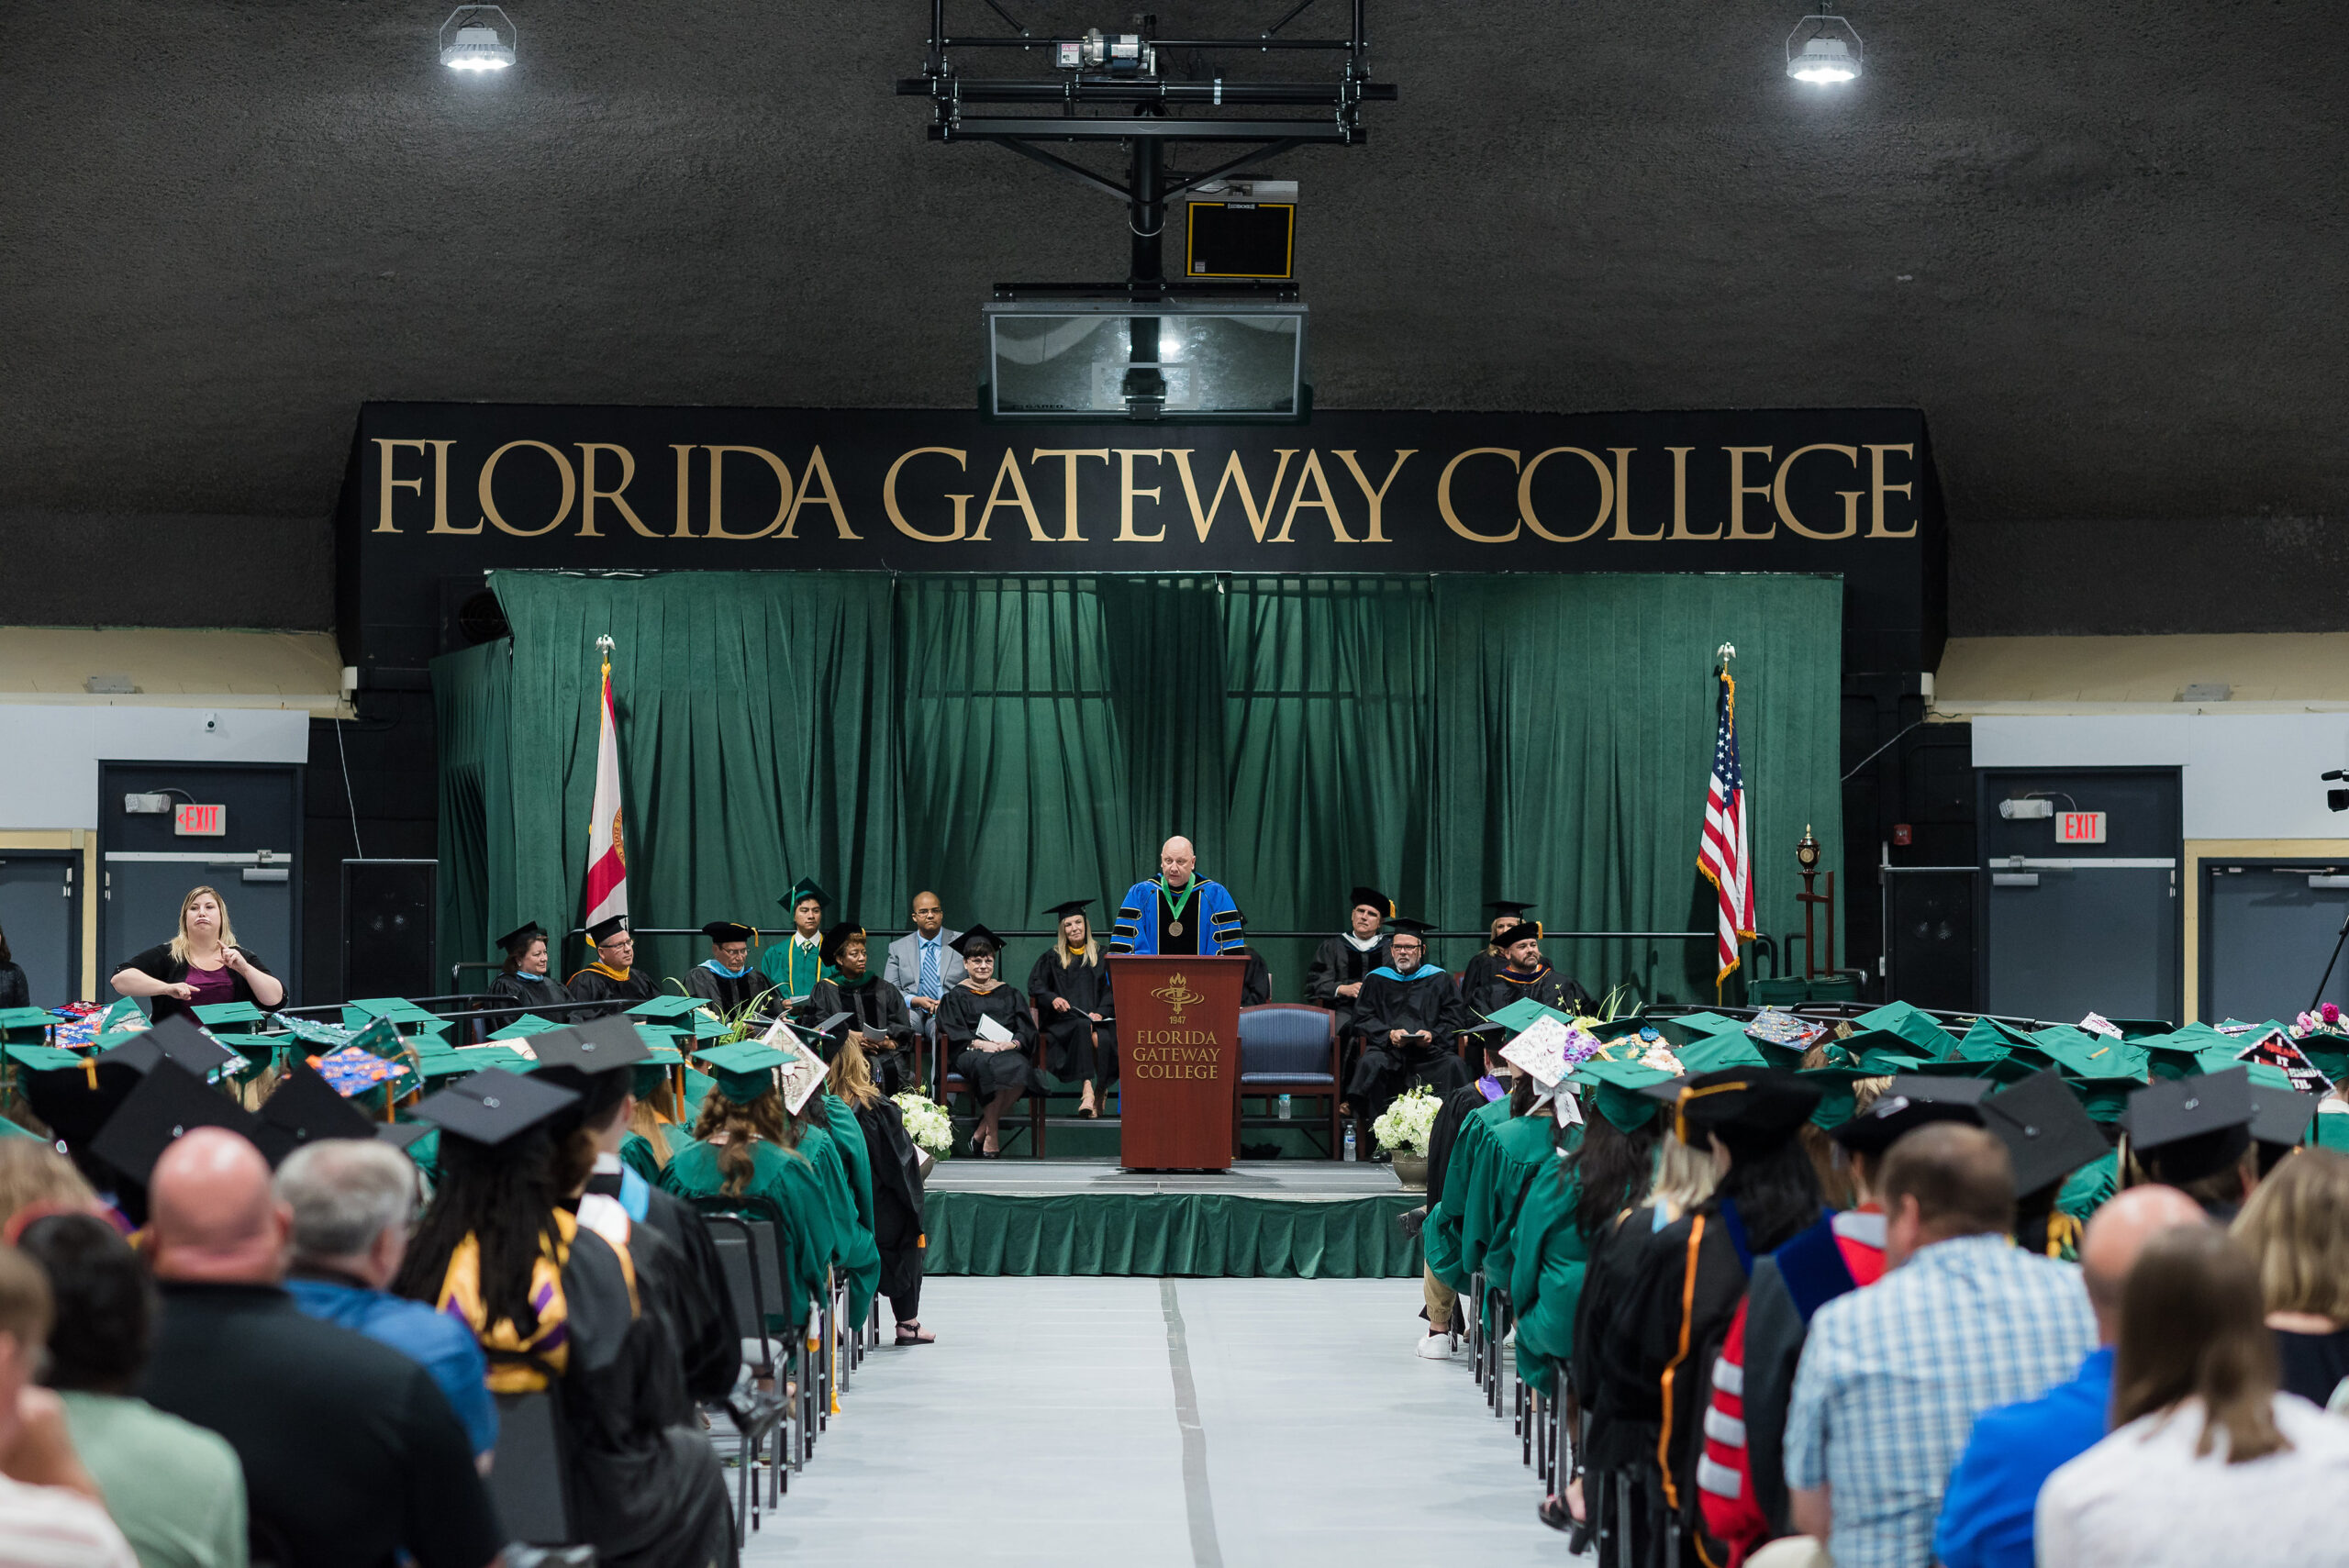 Letter from Governor Scott for FGC Graduates